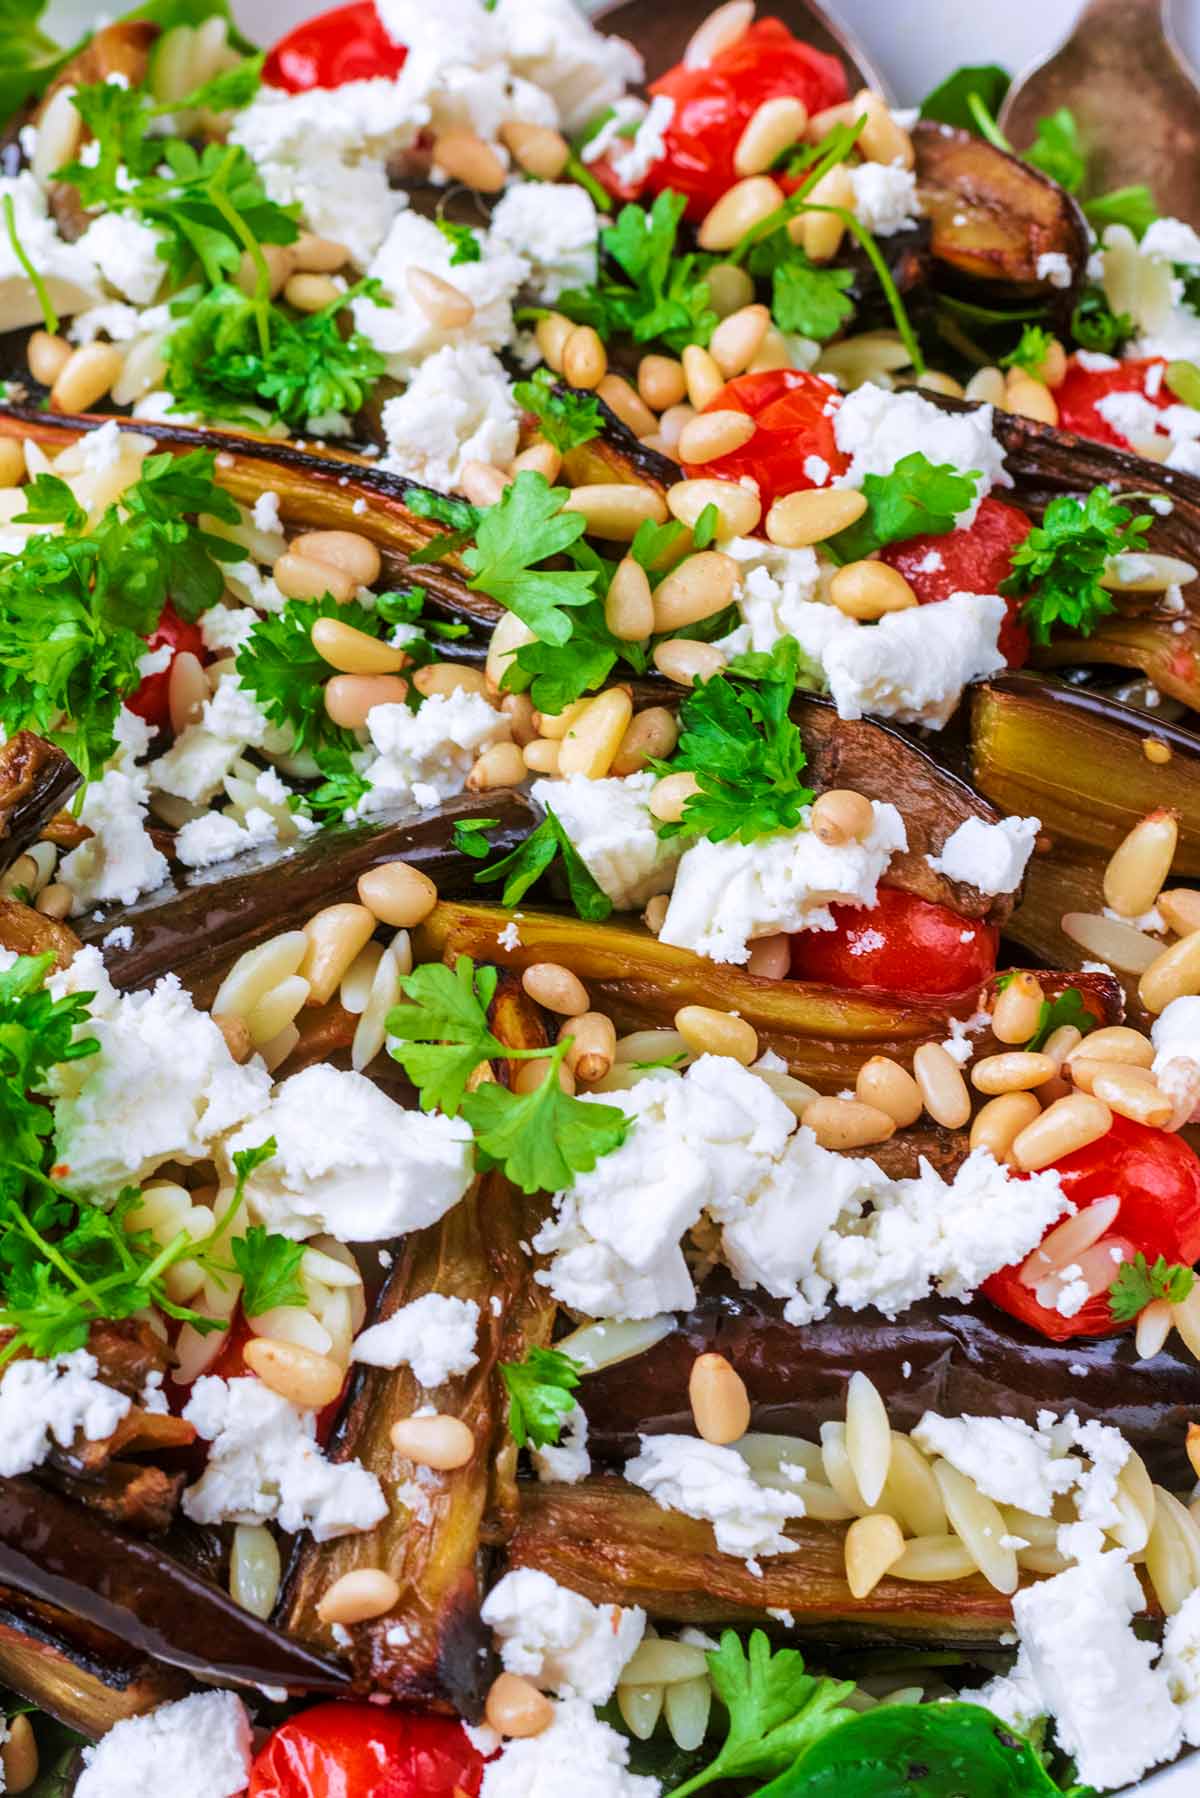 Roasted aubergines and tomatoes on top of salad leaves all topped with feta and parsley.